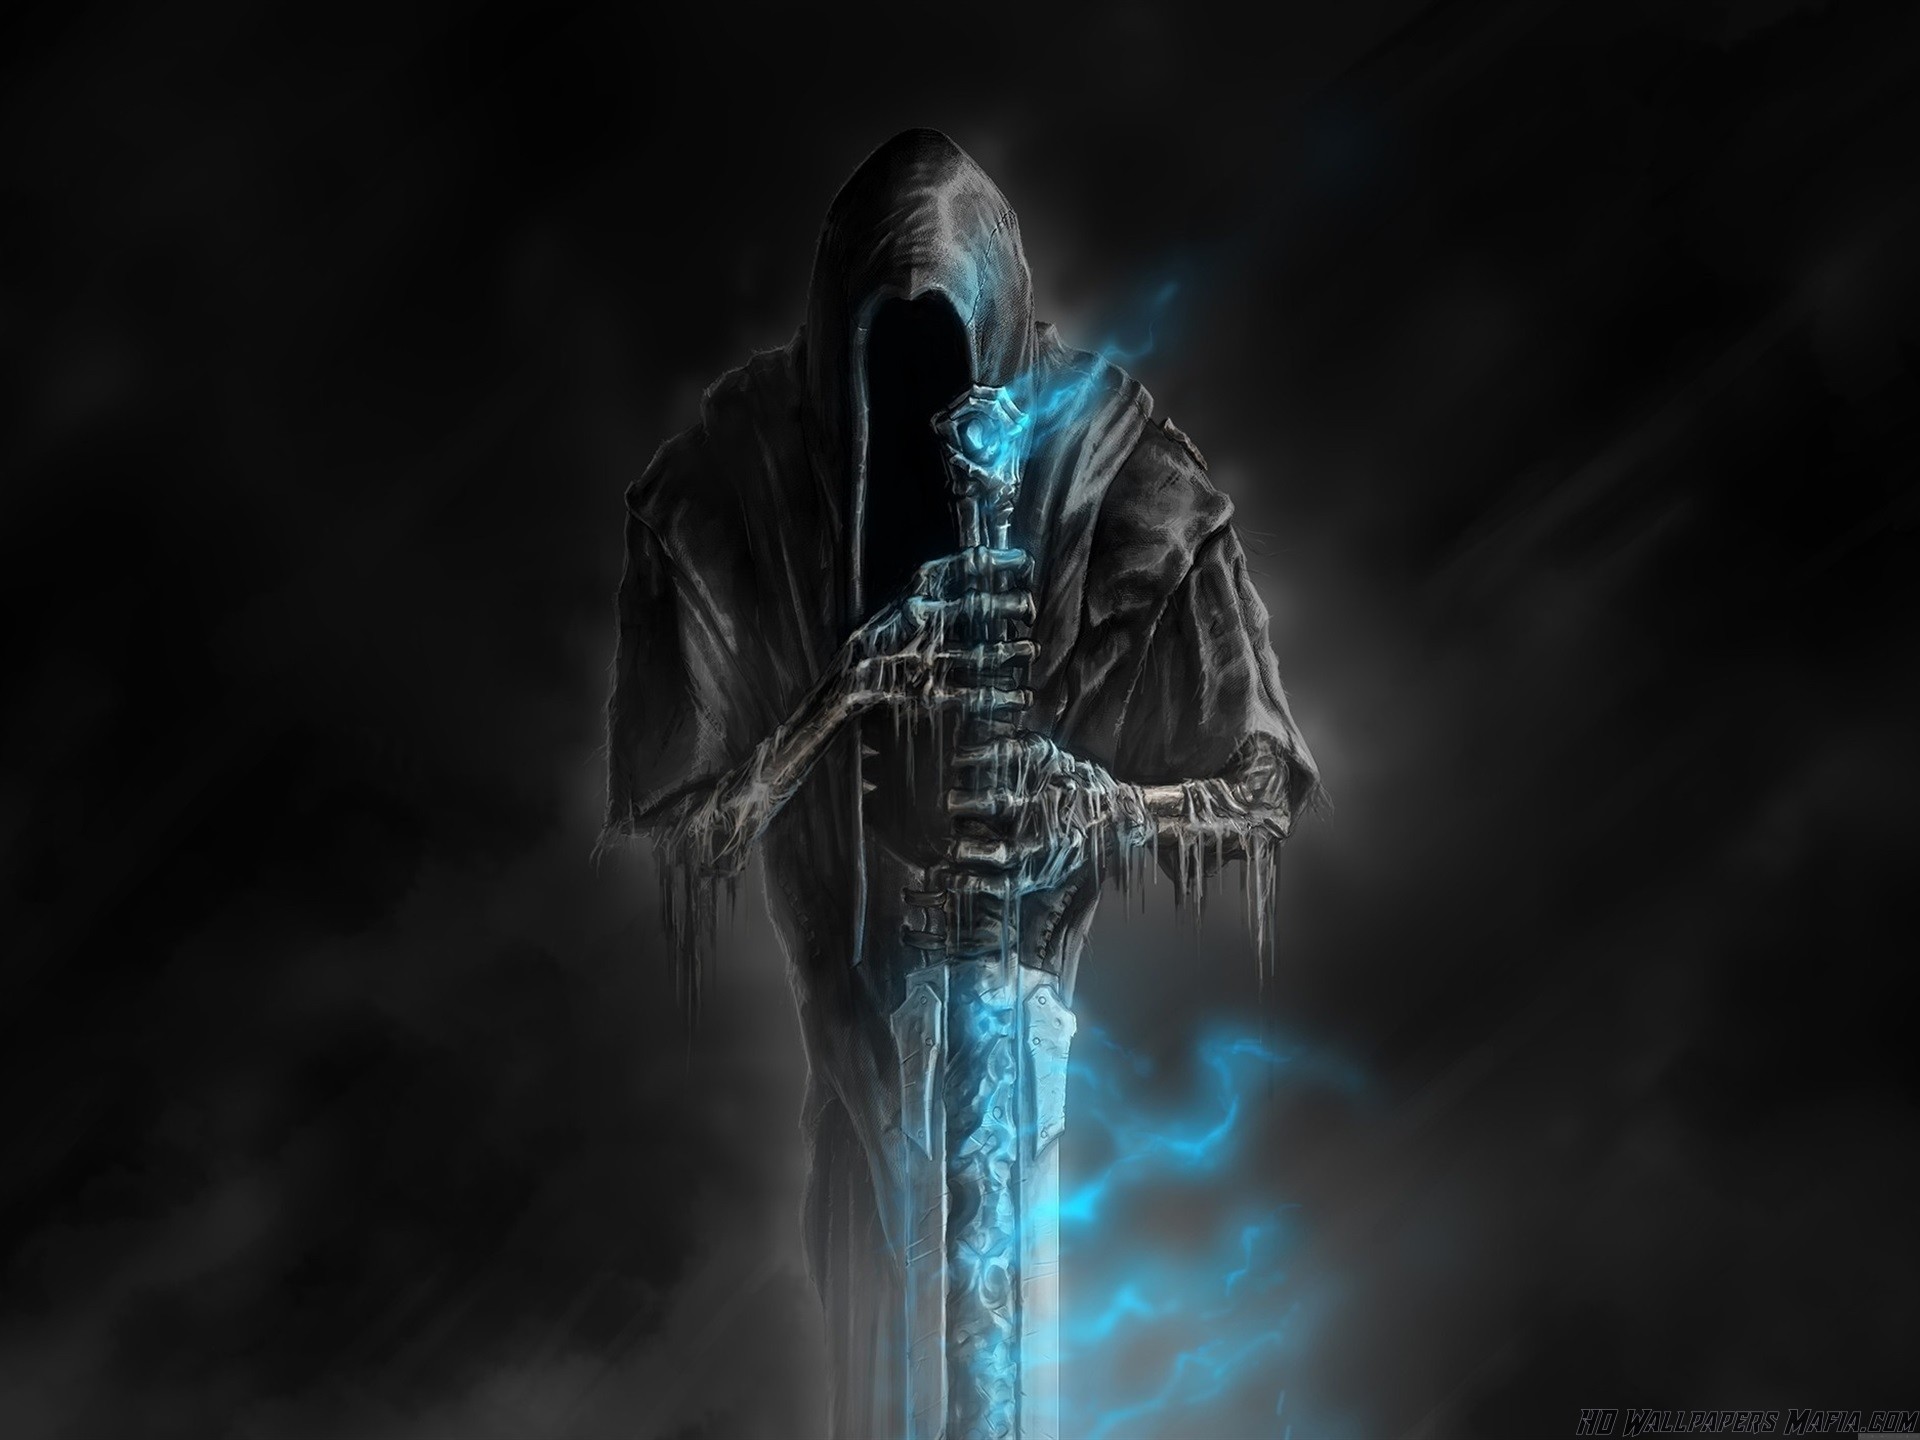 1920x1440 Welcome to Hell, Horror, Death, Sword, Darkness, Blue Flame